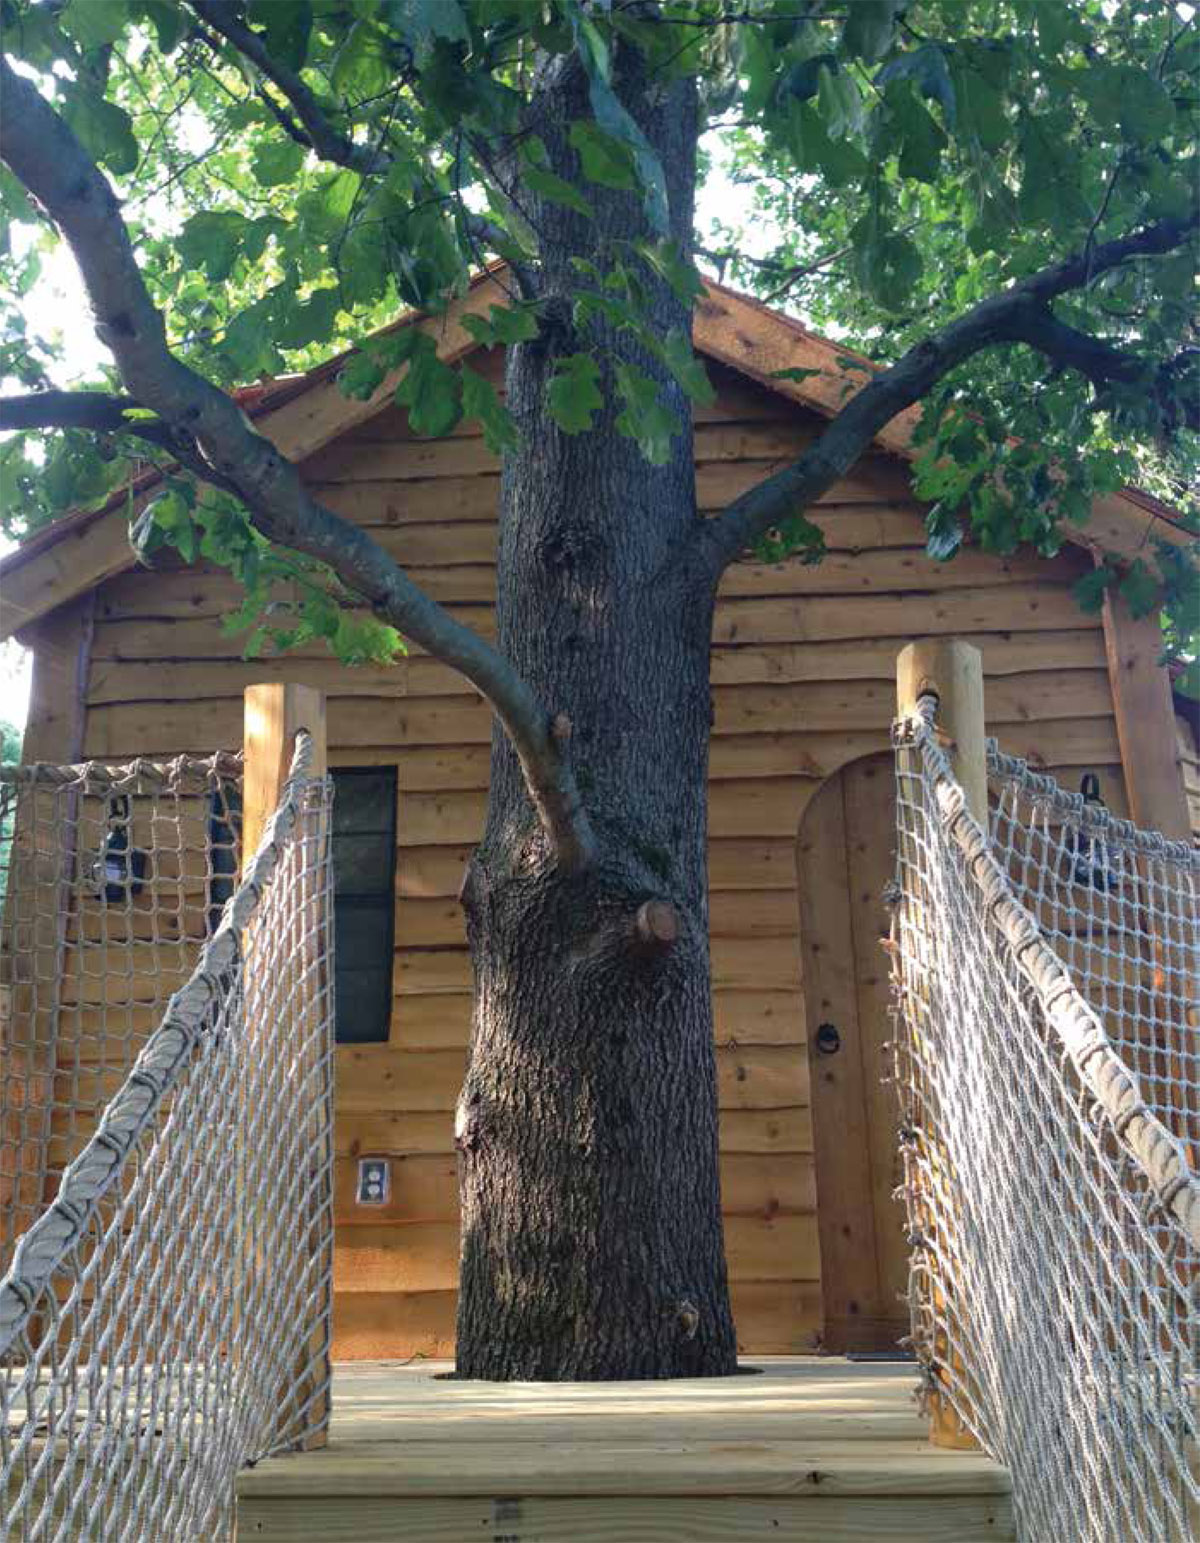 Backyard Treehouses Building Plans Tips and Advice - image 6